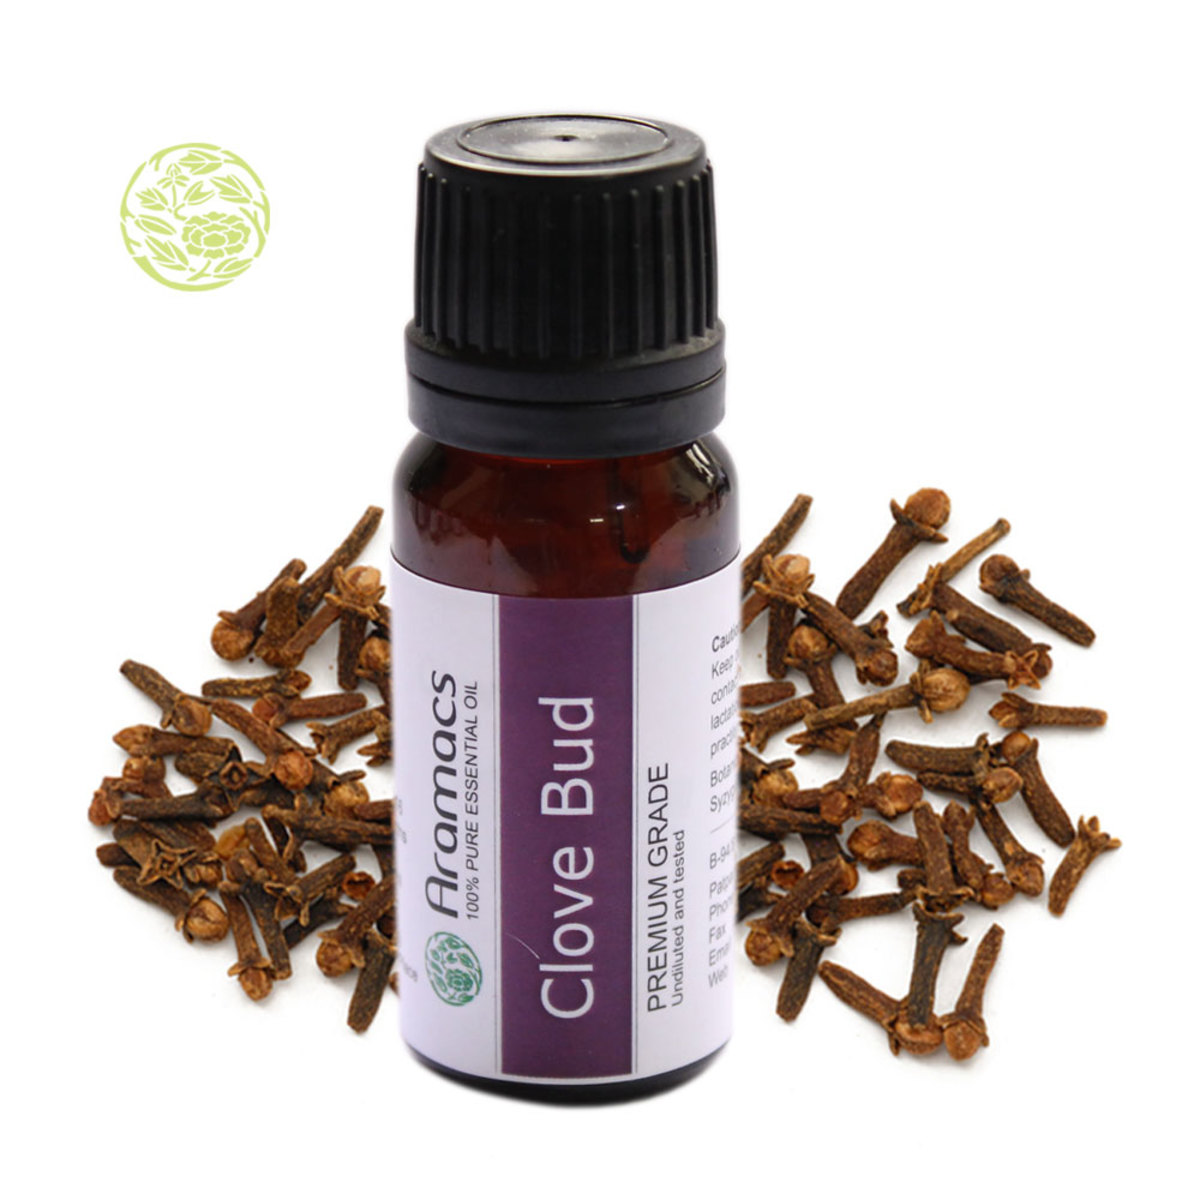 Clove oil is one inexpensive solution for dental pain.